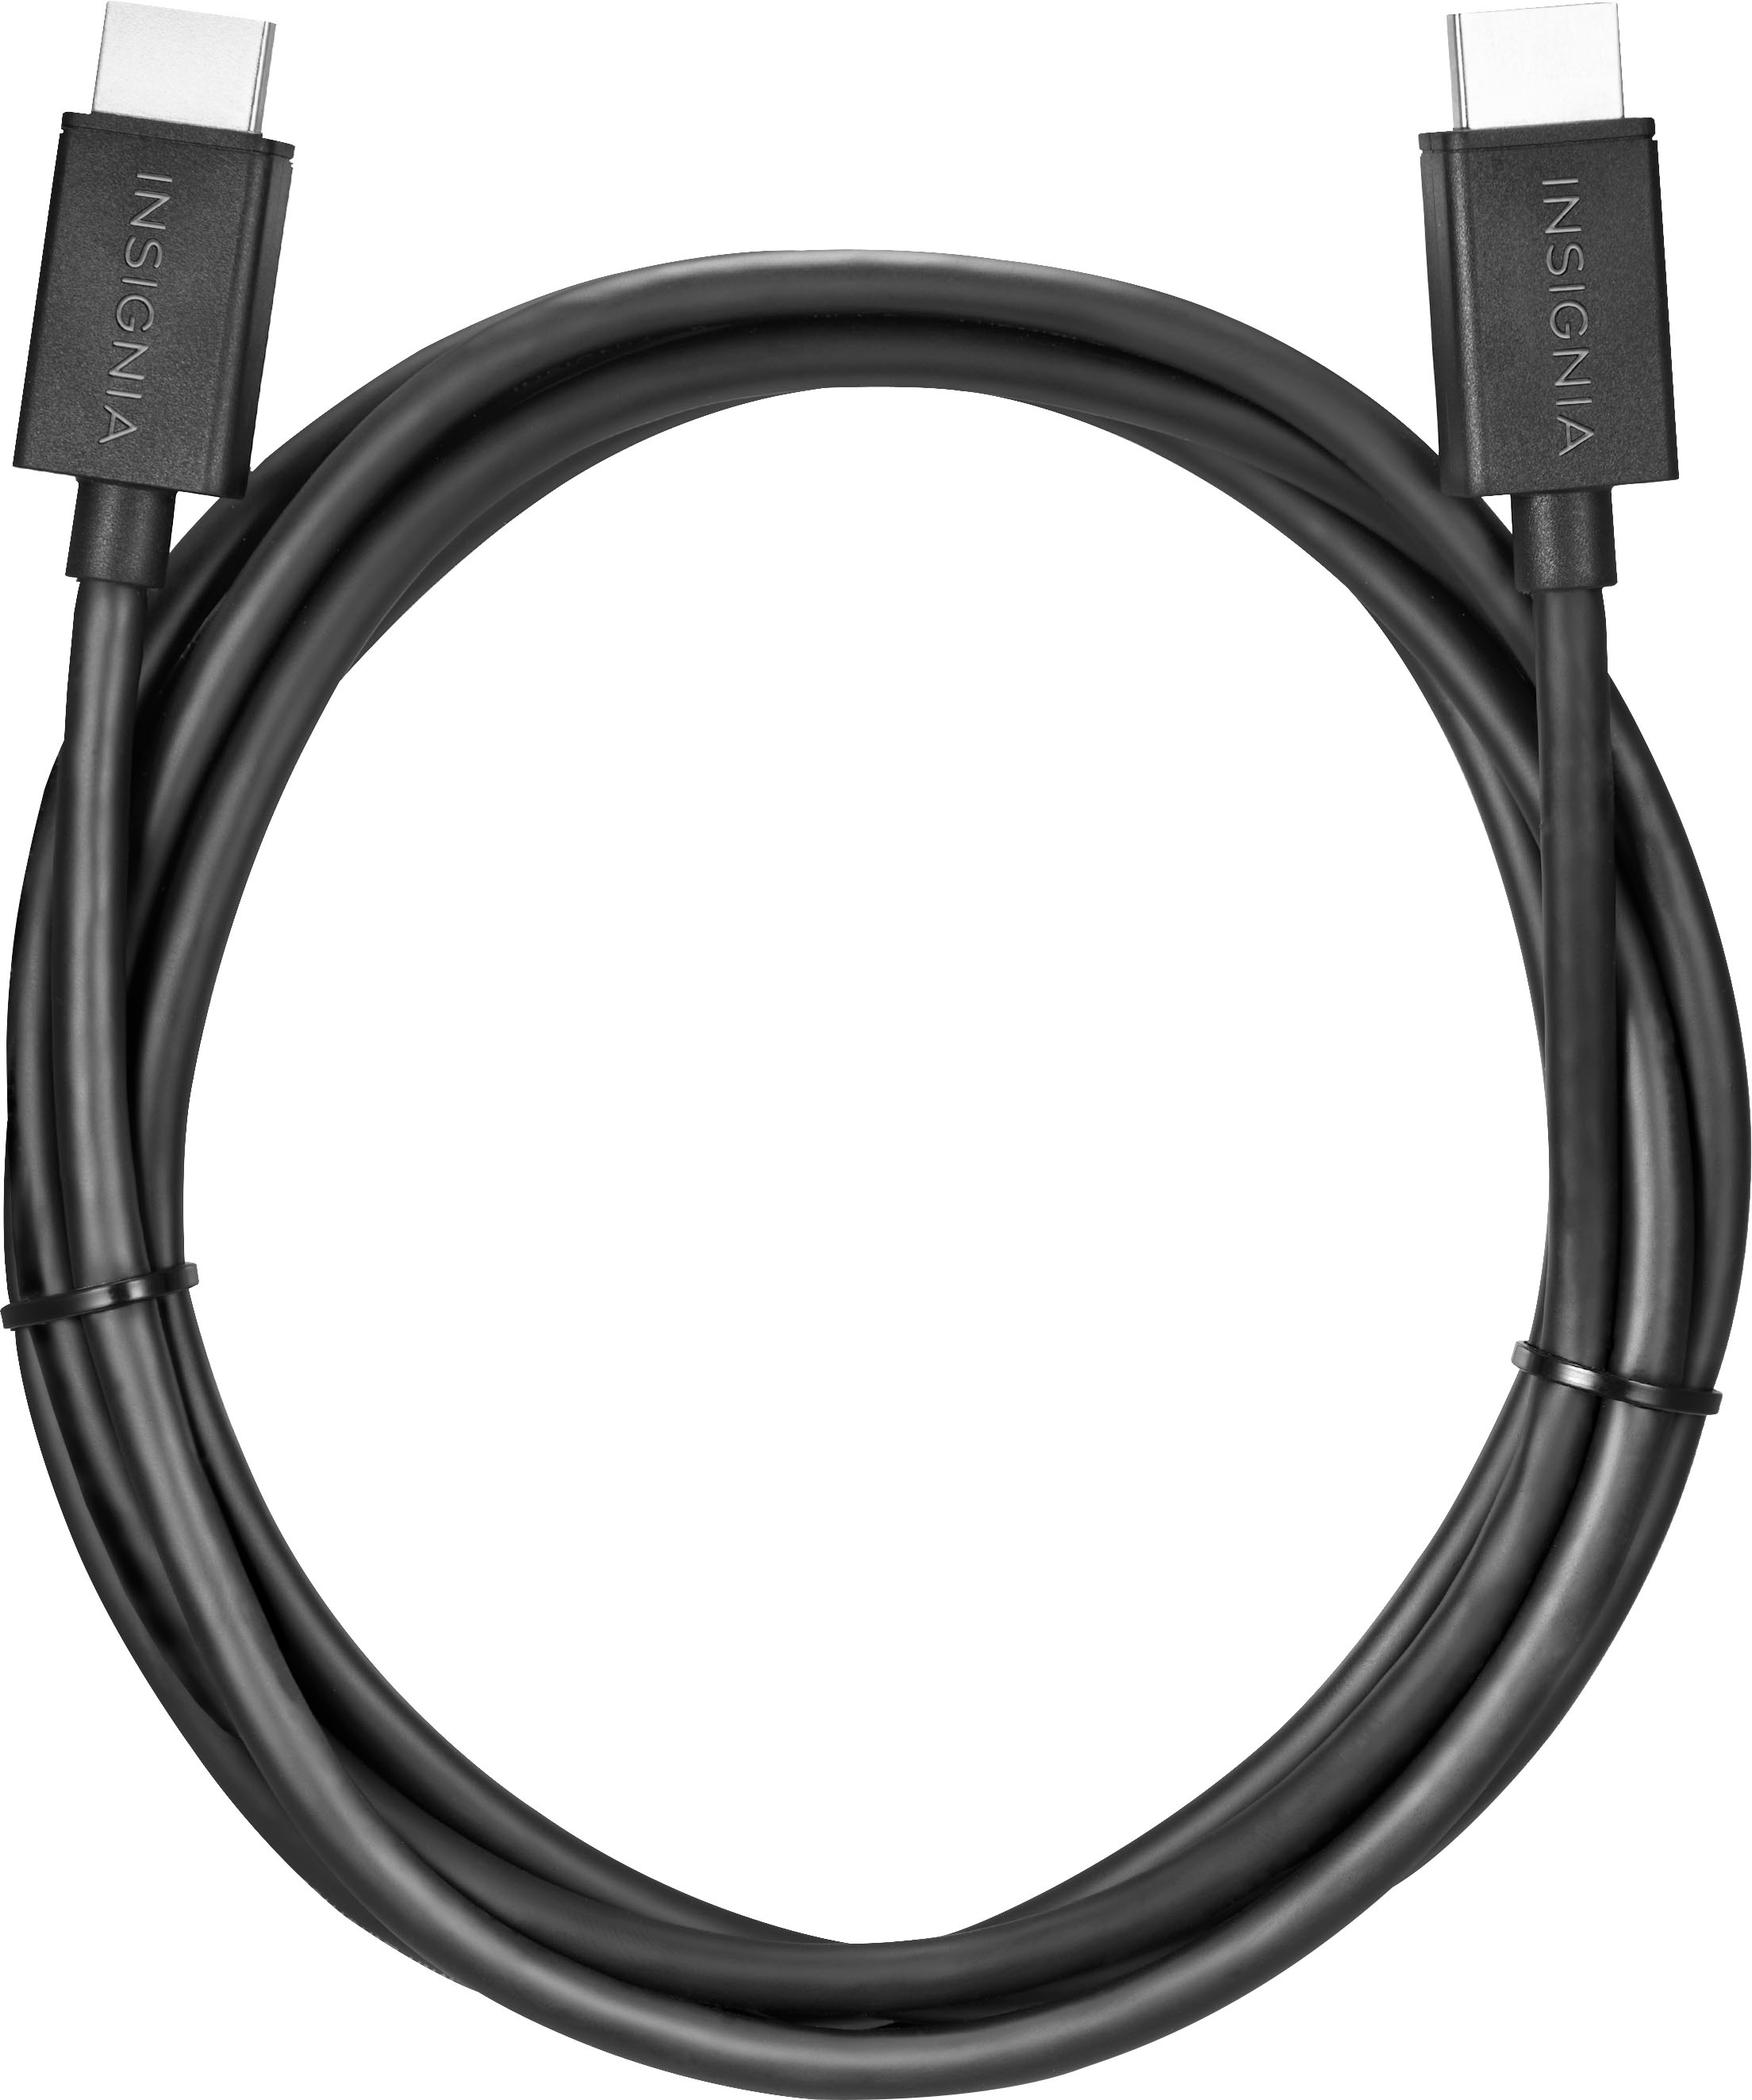 Insignia™ 8' 4K Ultra HD HDMI Cable Black NS-HG08L22 - Best Buy